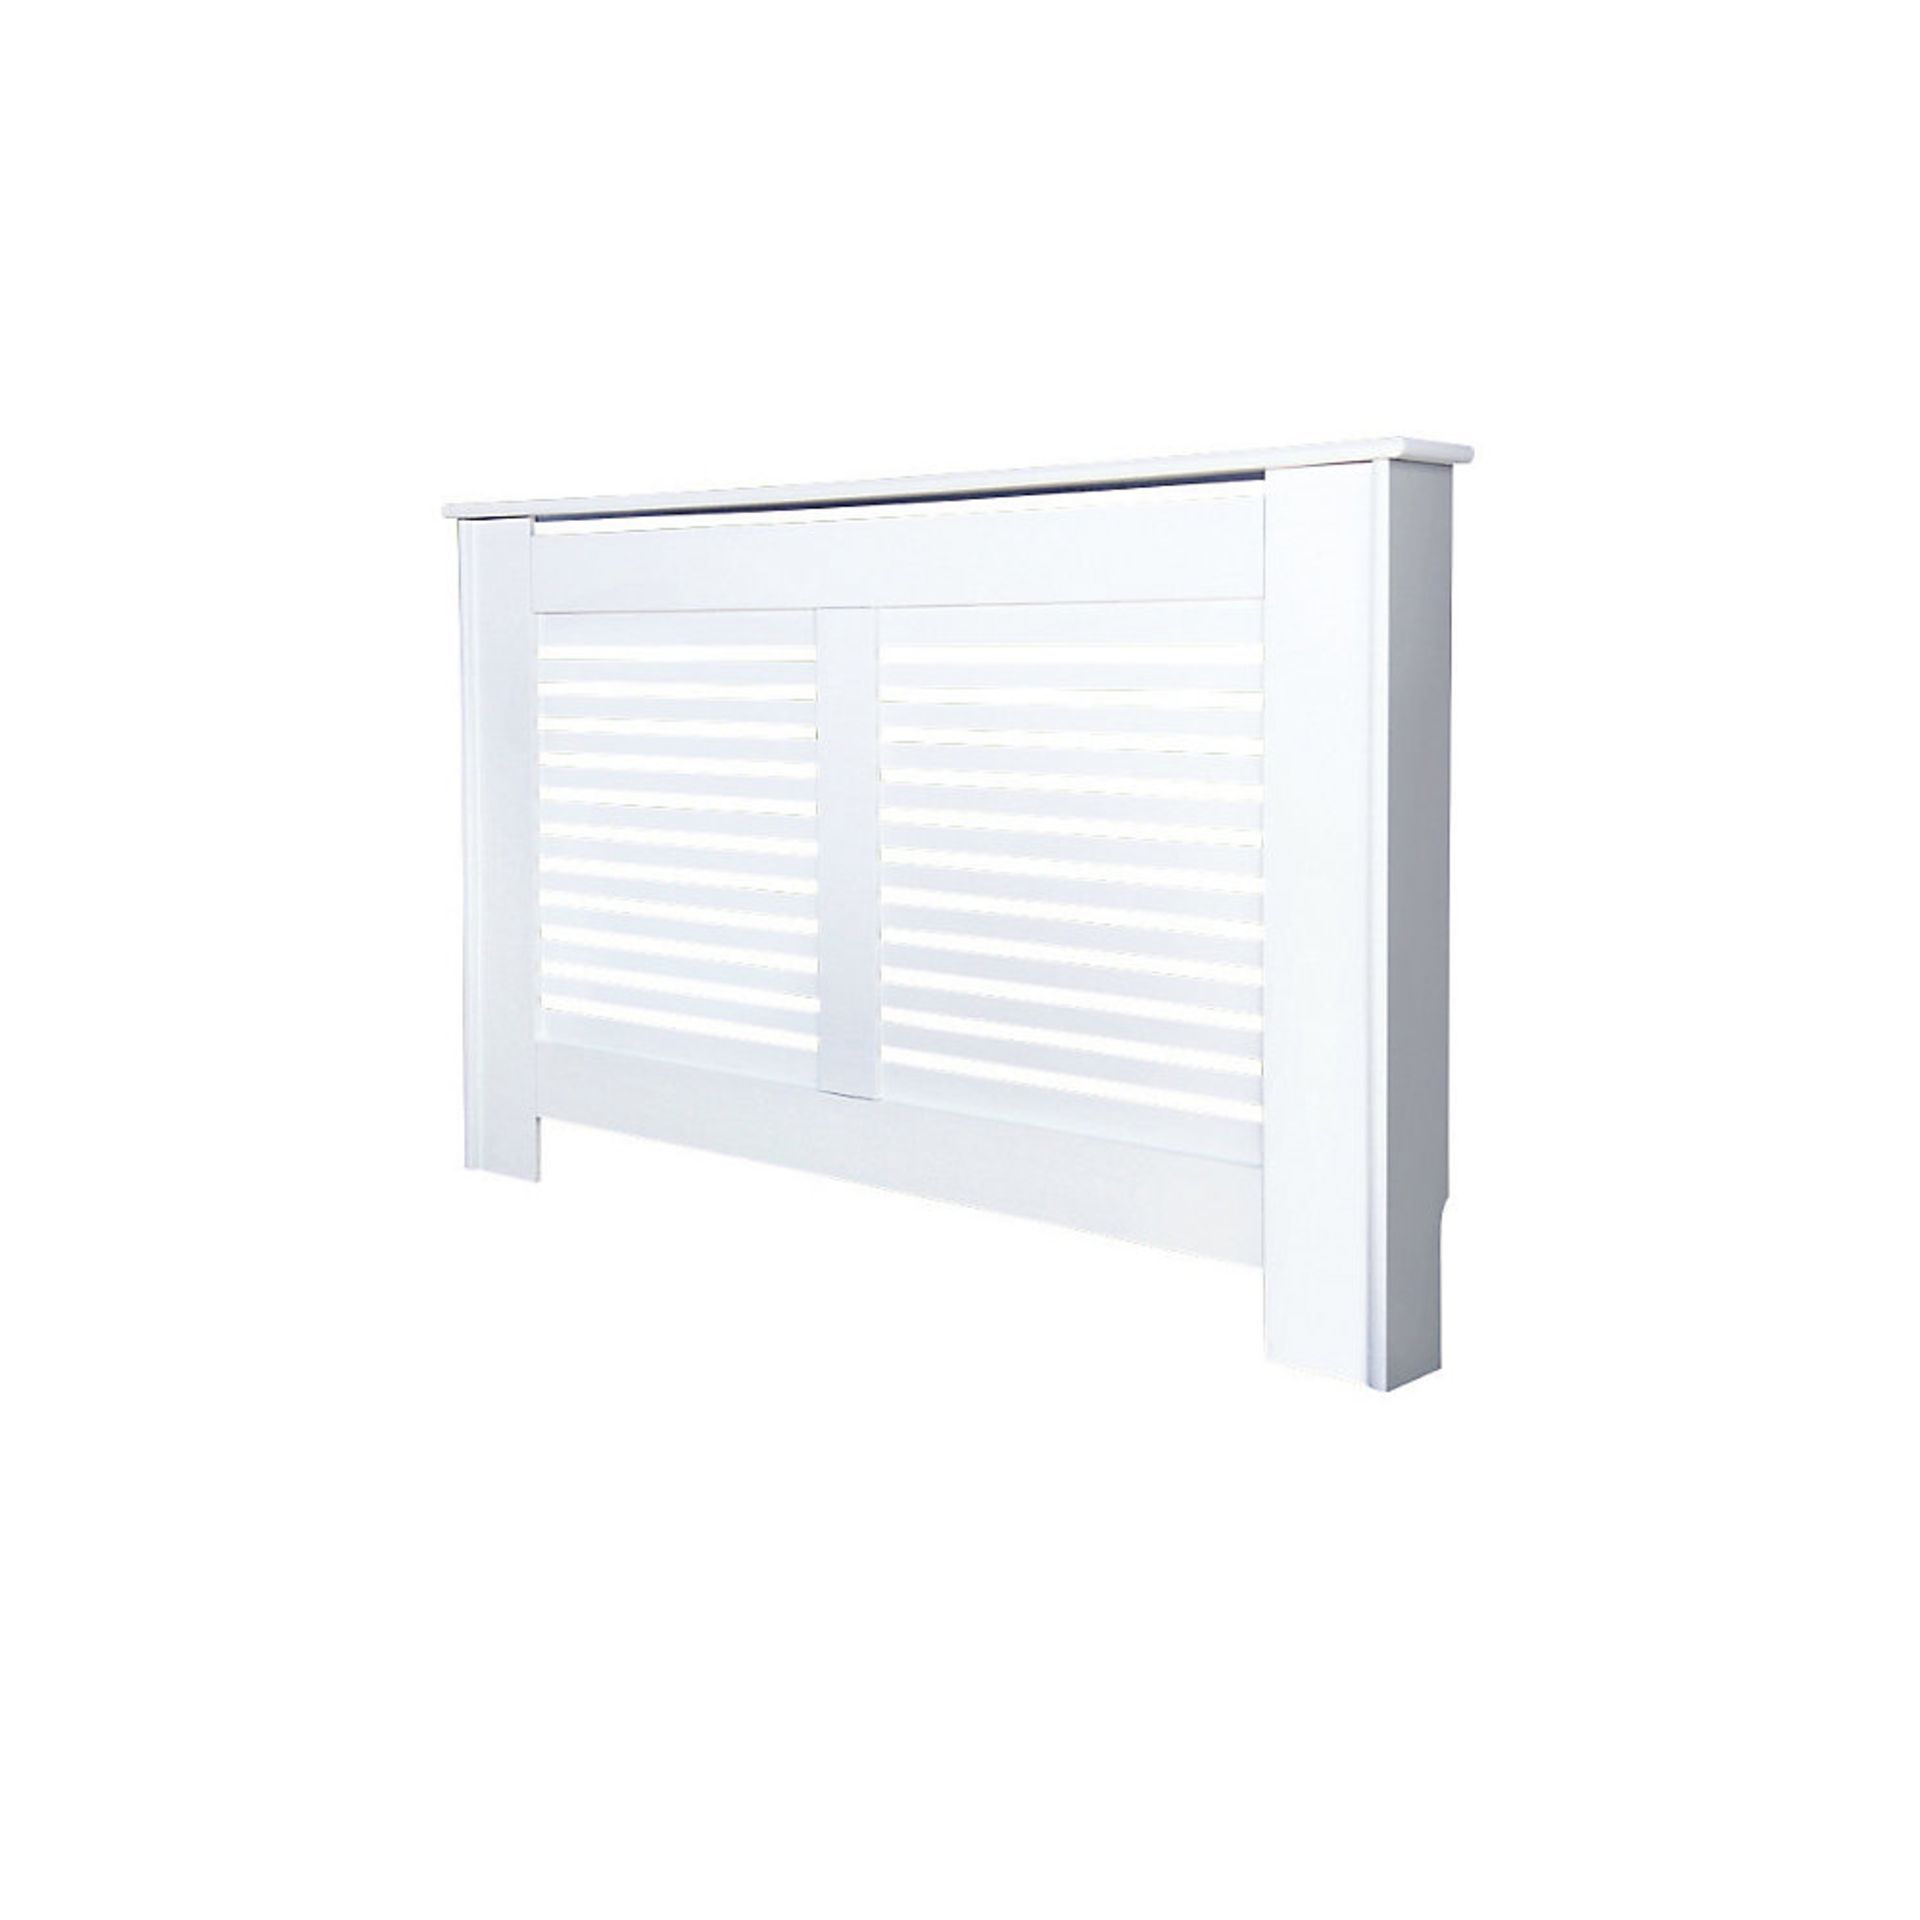 (UK256) 1195 X 200 X 900MM CONTEMPORARY SUFFOLK RADIATOR CABINET MEDIUM WHITE. Ideal for - Image 2 of 2